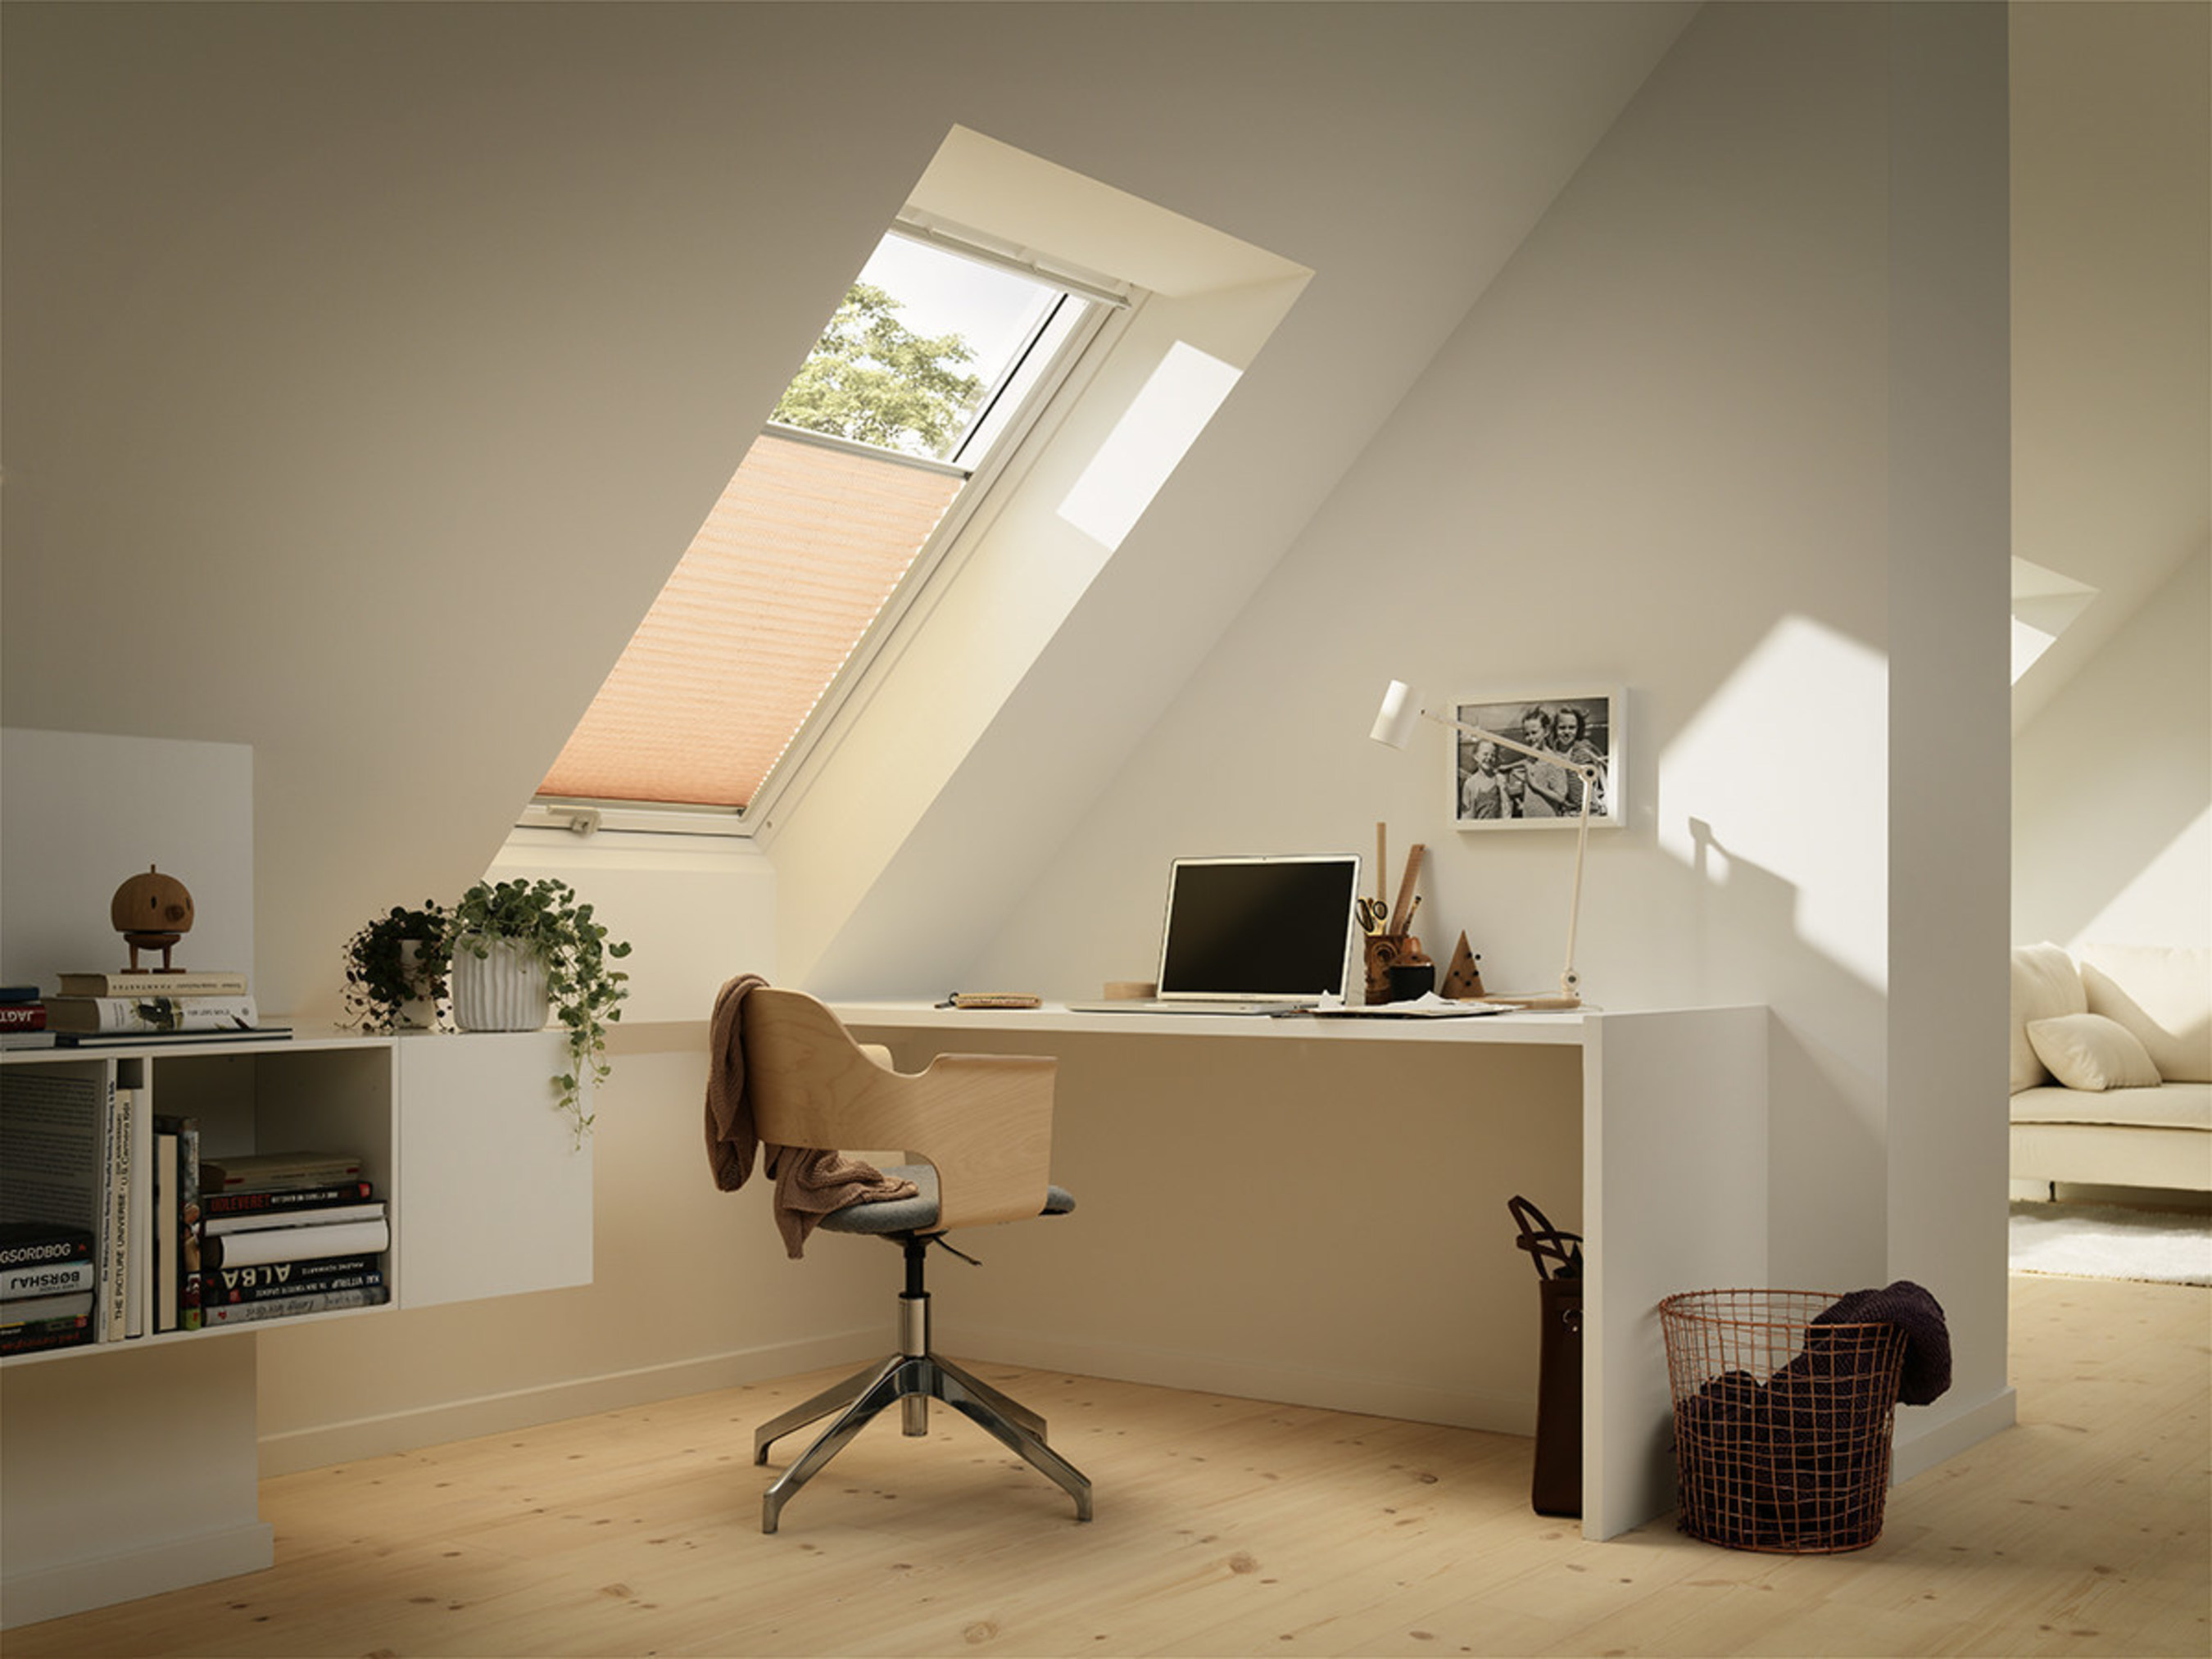 Brighten your home office niche with a roof, window, or a solar-powered, fresh-air skylight while bringing natural light and fresh air into the work space. Energy Star-qualified, solar-powered, fresh-air skylights from Velux America close automatically in case of rain, have three layers of water protection, and carry a 10-year warranty against leaks.  Operated by programmable touchpad remote control, solar skylights, blinds, and installation costs are eligible for a 30 percent federal tax credit...